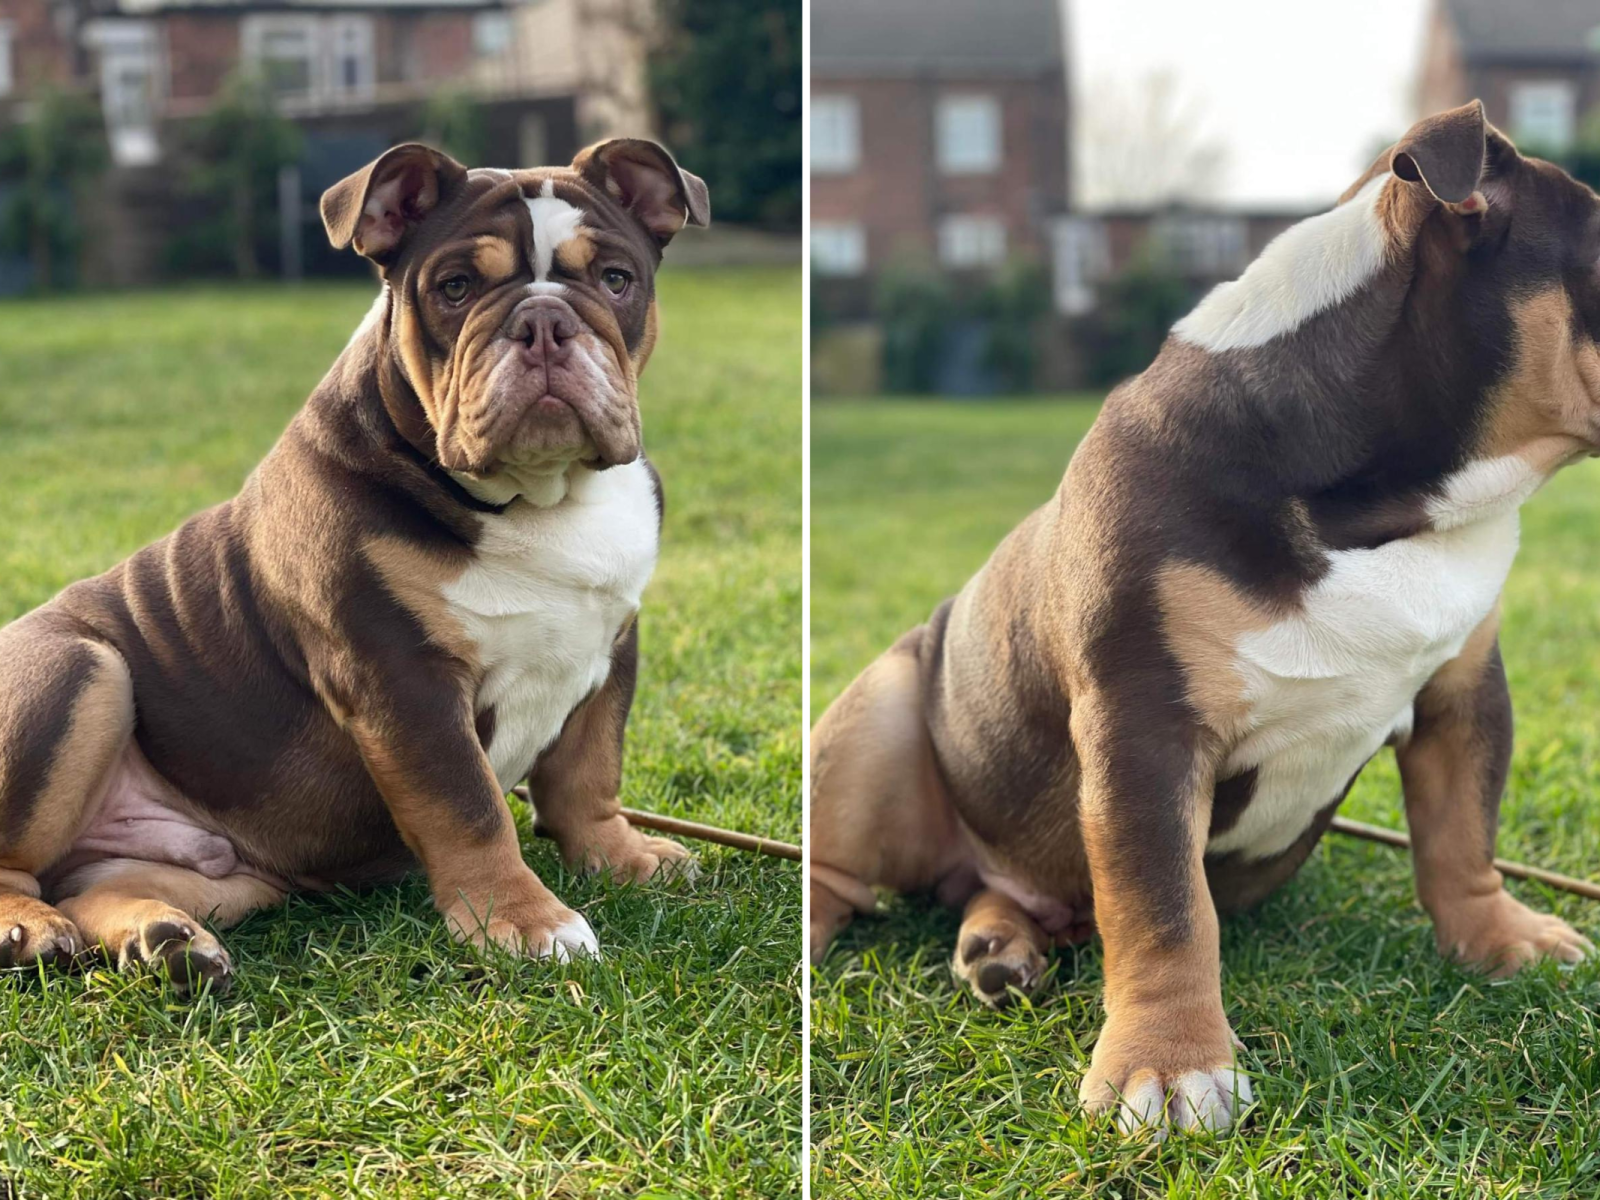 Internet in Stitches at Bulldog's Way of Getting Out of Walkies